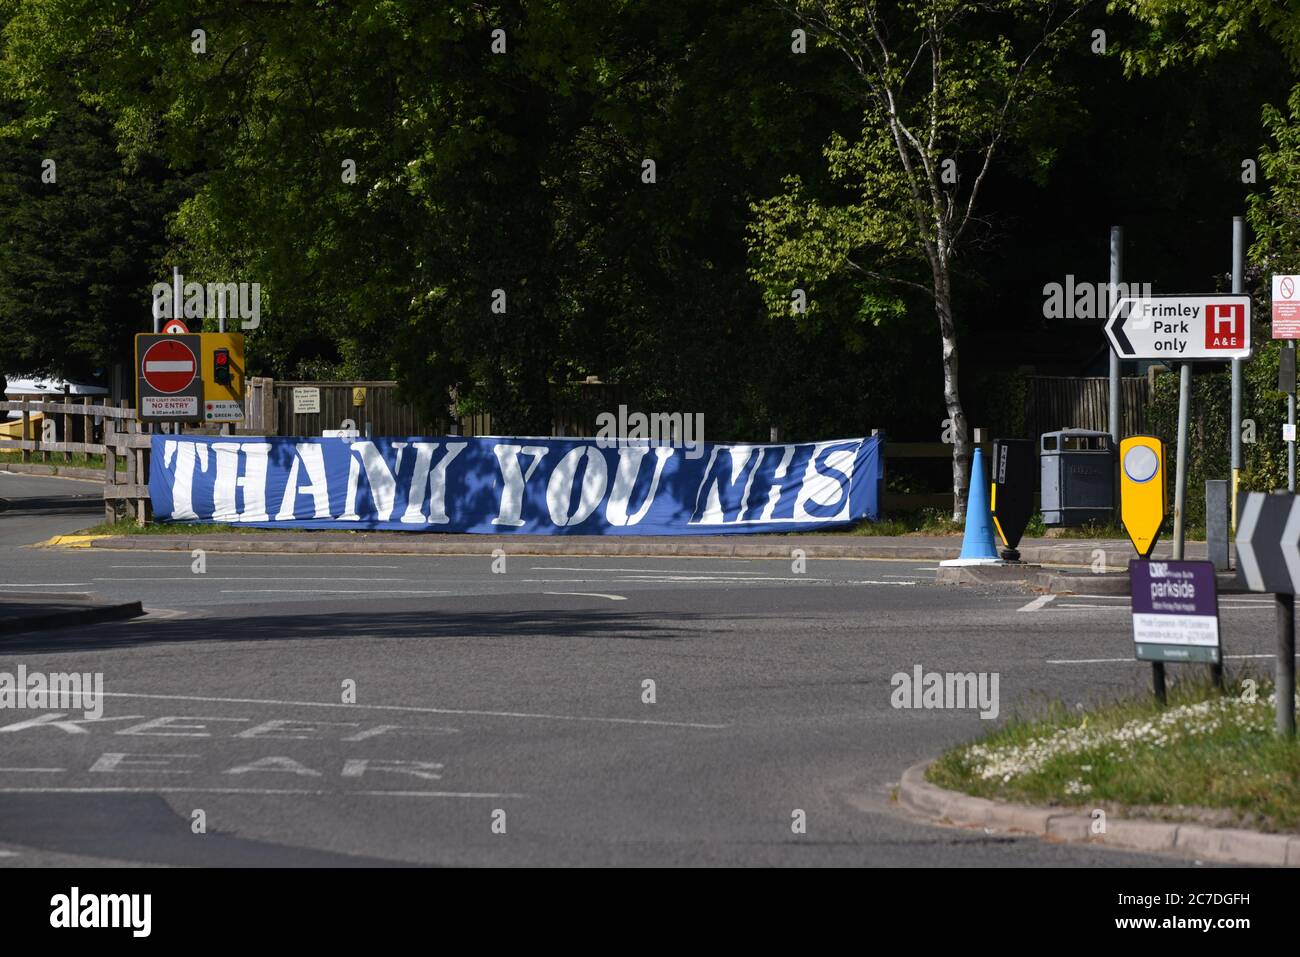 Frimley, Surrey, England - 26 April 2020: A sign thanking the NHS at the entrance to a hospital during the first Covid-19 lockdown of 2020 in England Stock Photo